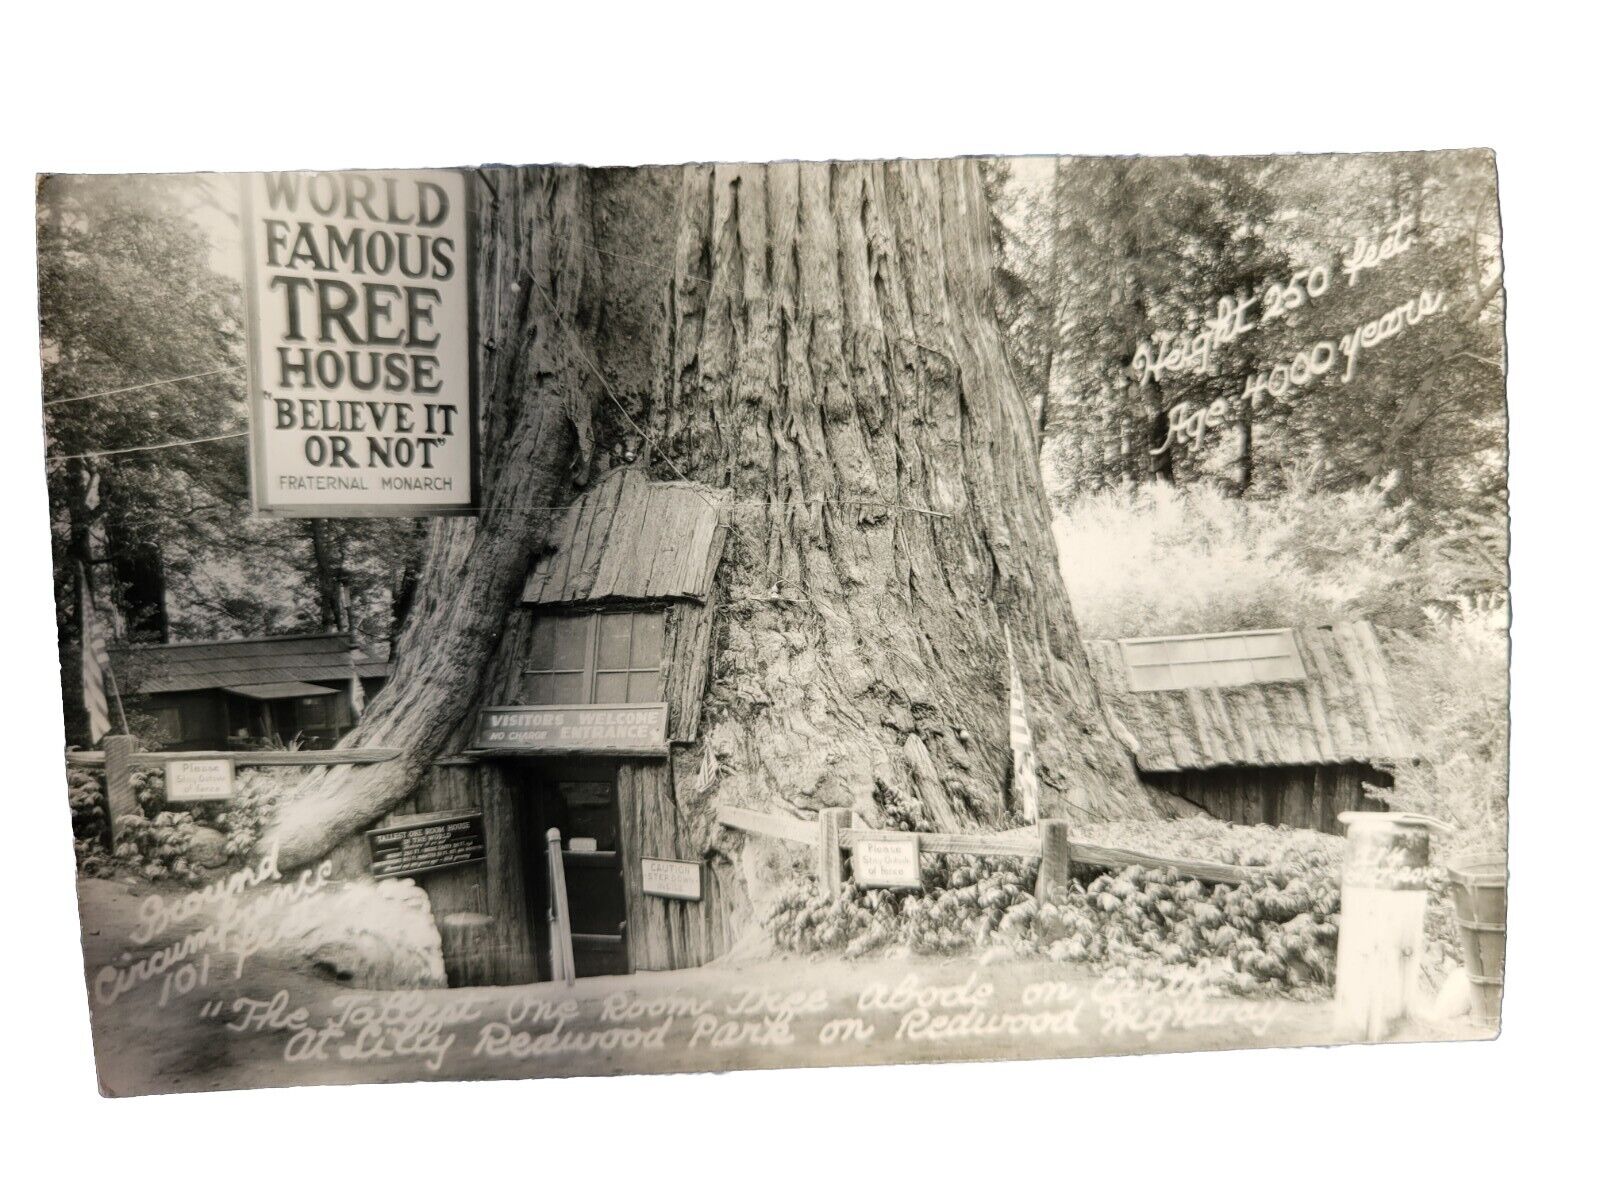 Antique VTG RPPC Redwood Park Highway CA Tallest One Room Tree house On Earth